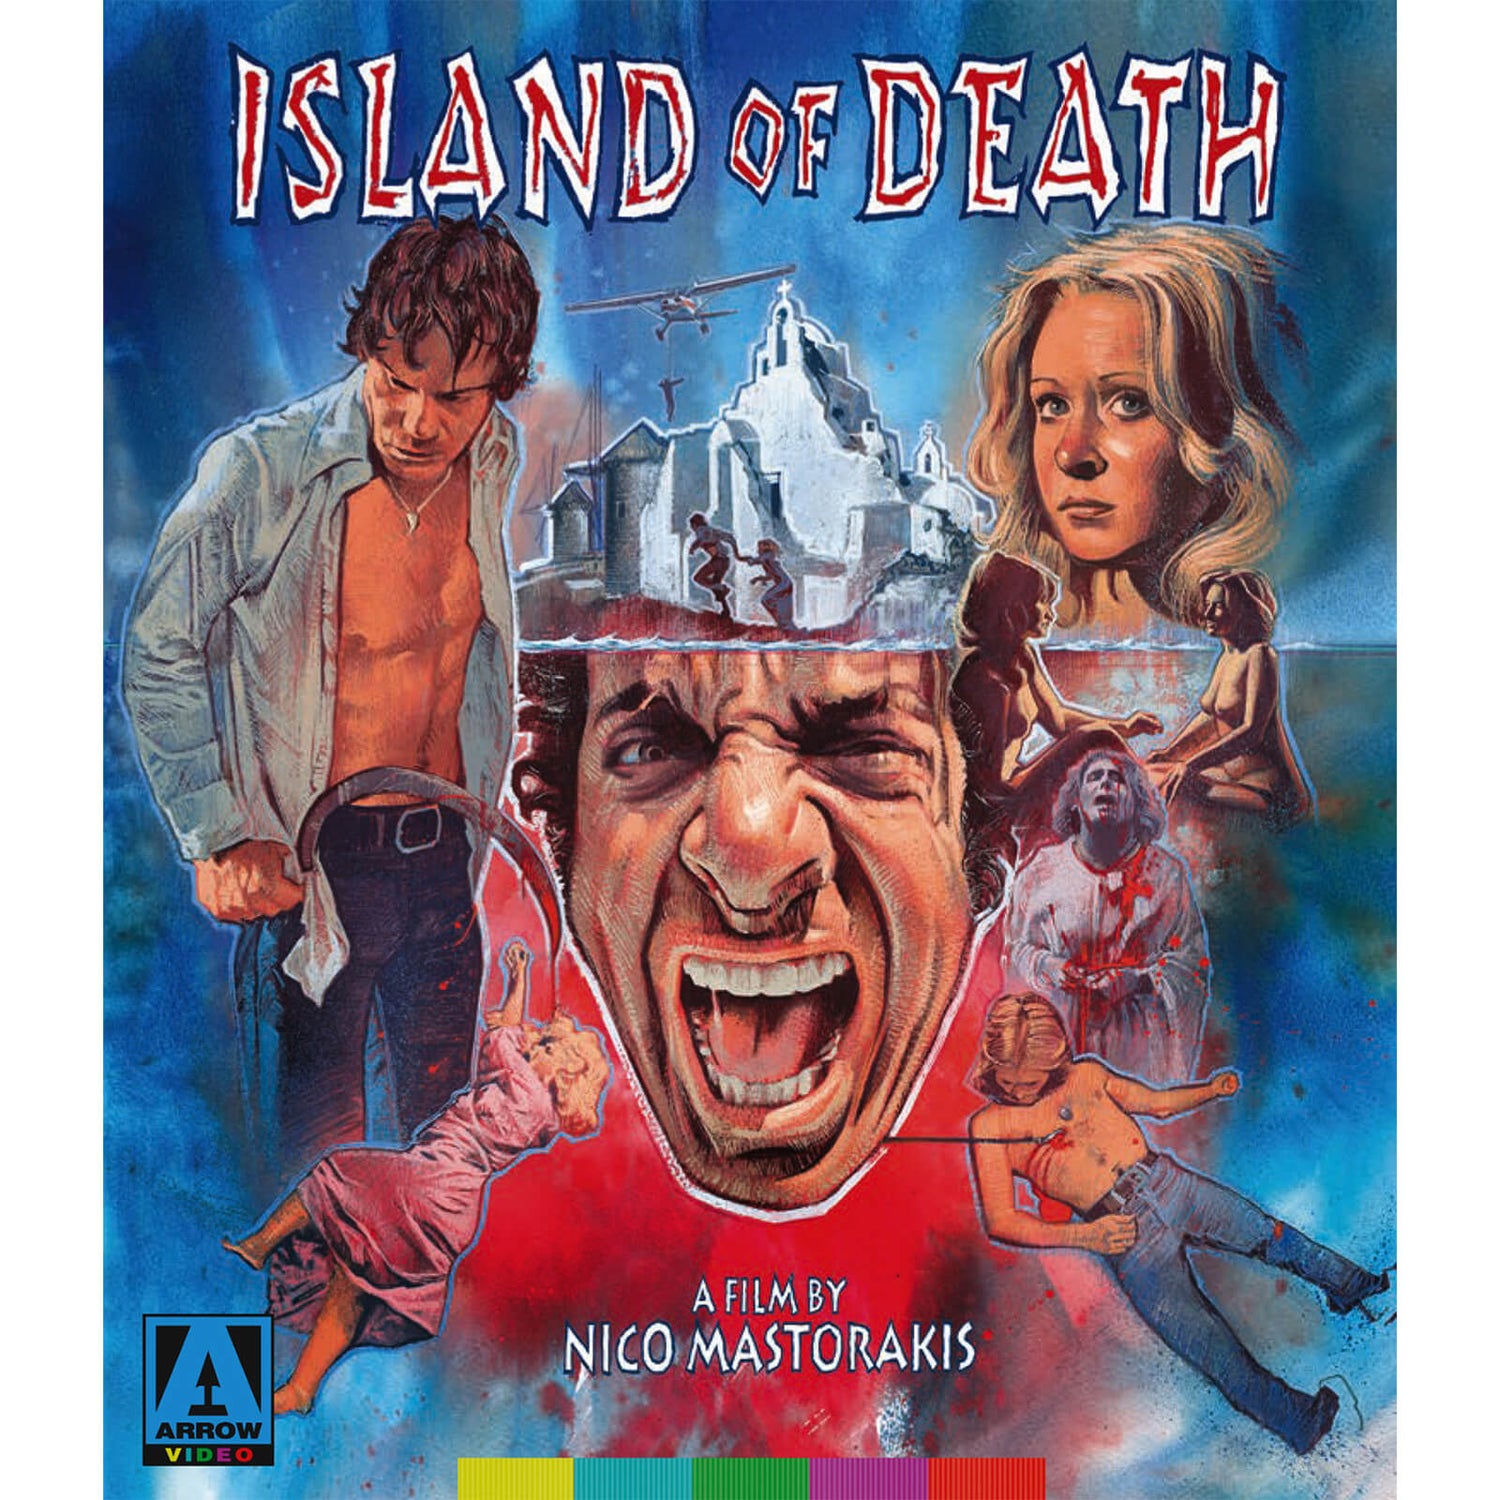 Island Of Death (Includes DVD)